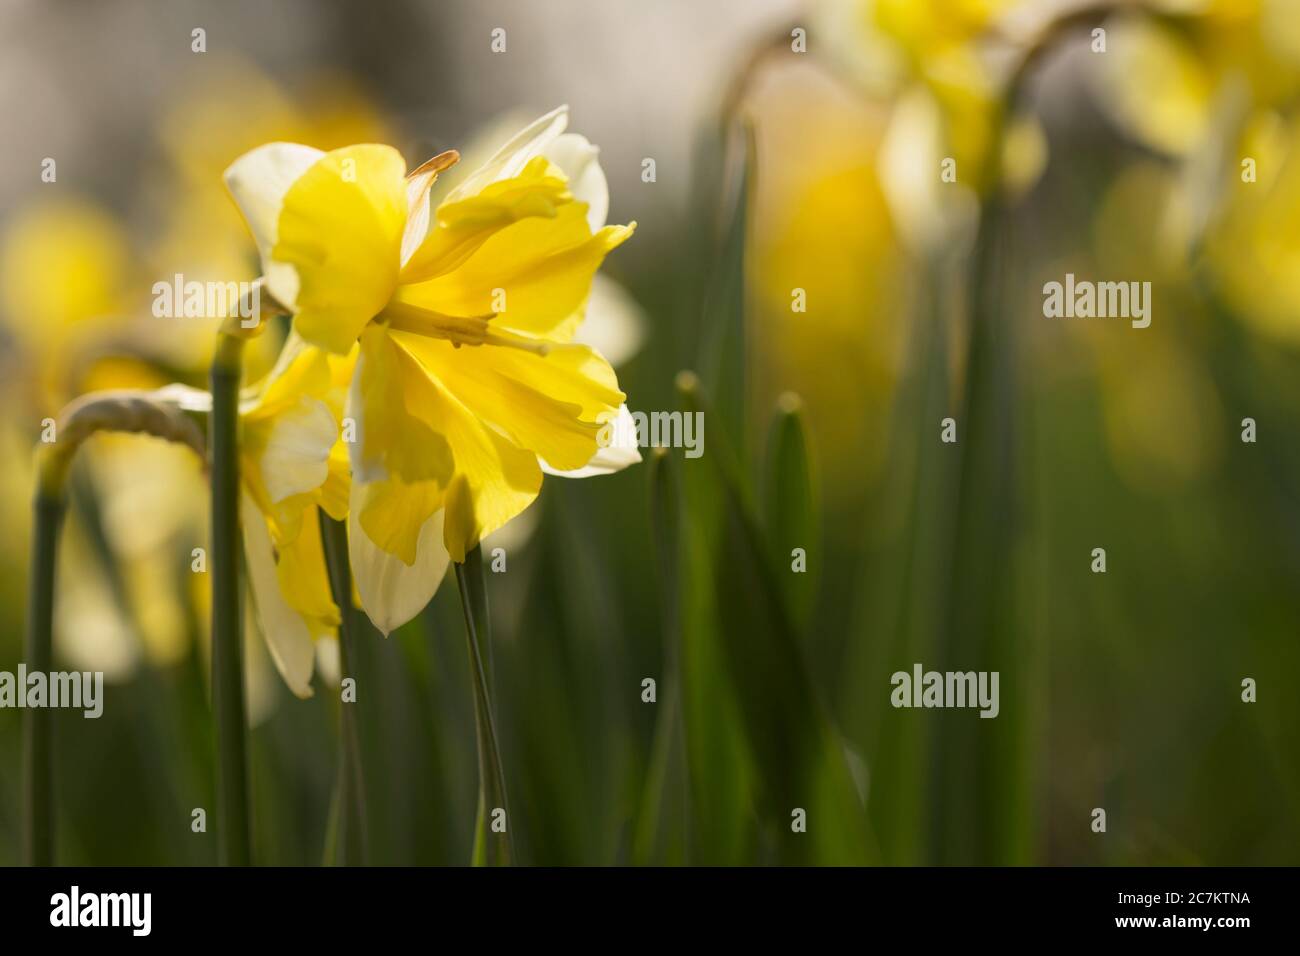 Yellow Narcissus Flowers, Early spring, Garden, Finland Stock Photo